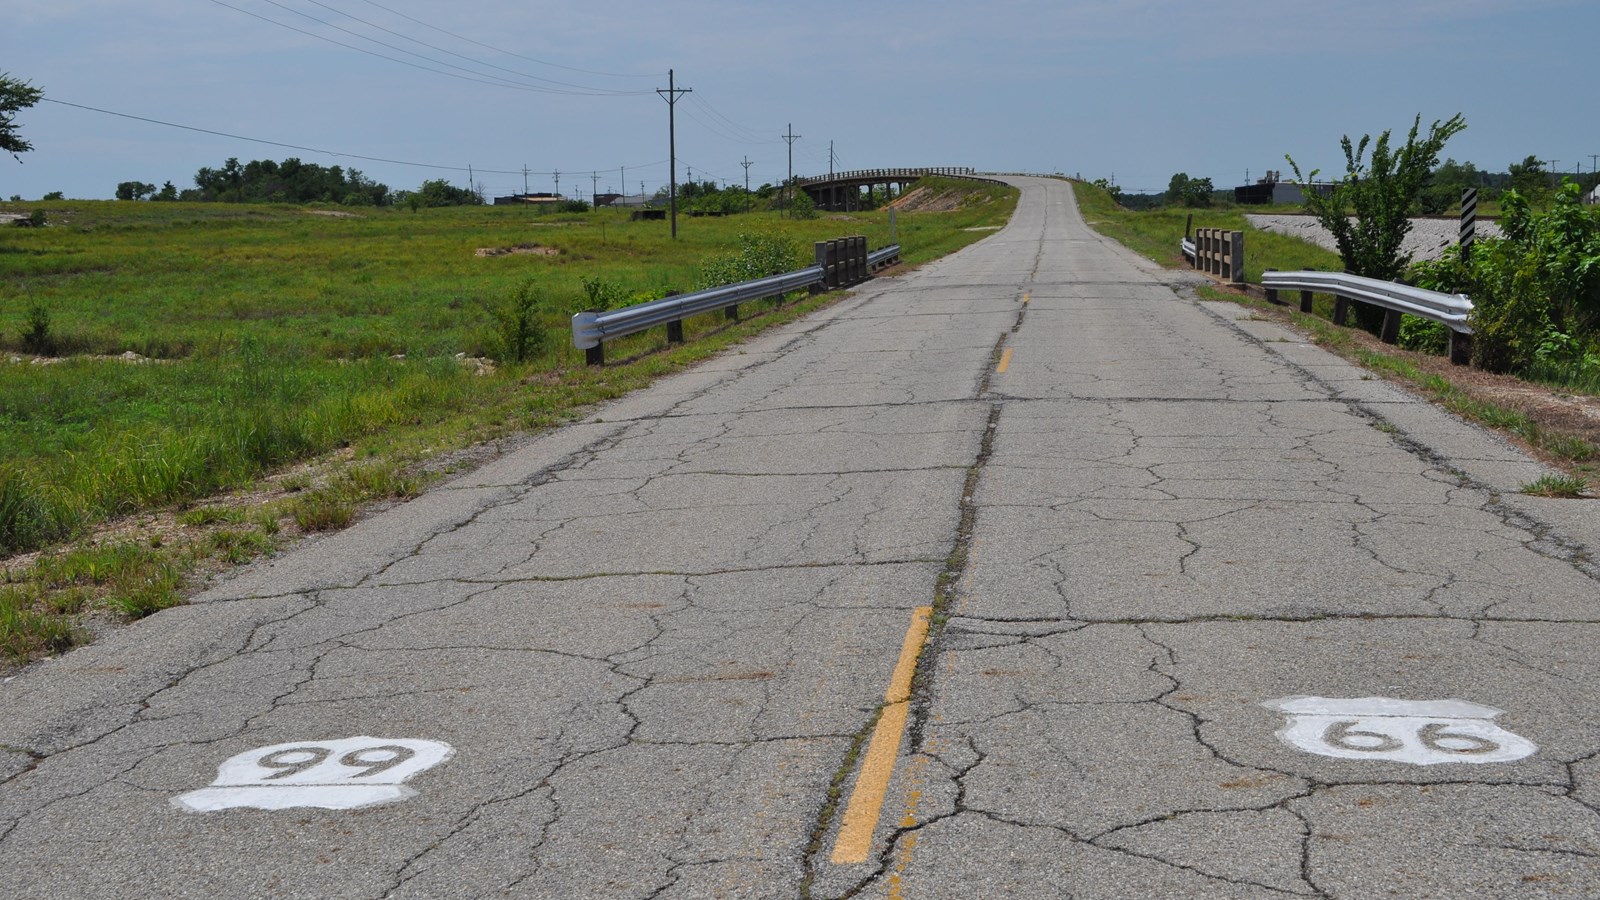 Two lane, asphalt road leading to bridge structure. Route 66 shields painted on pavement.